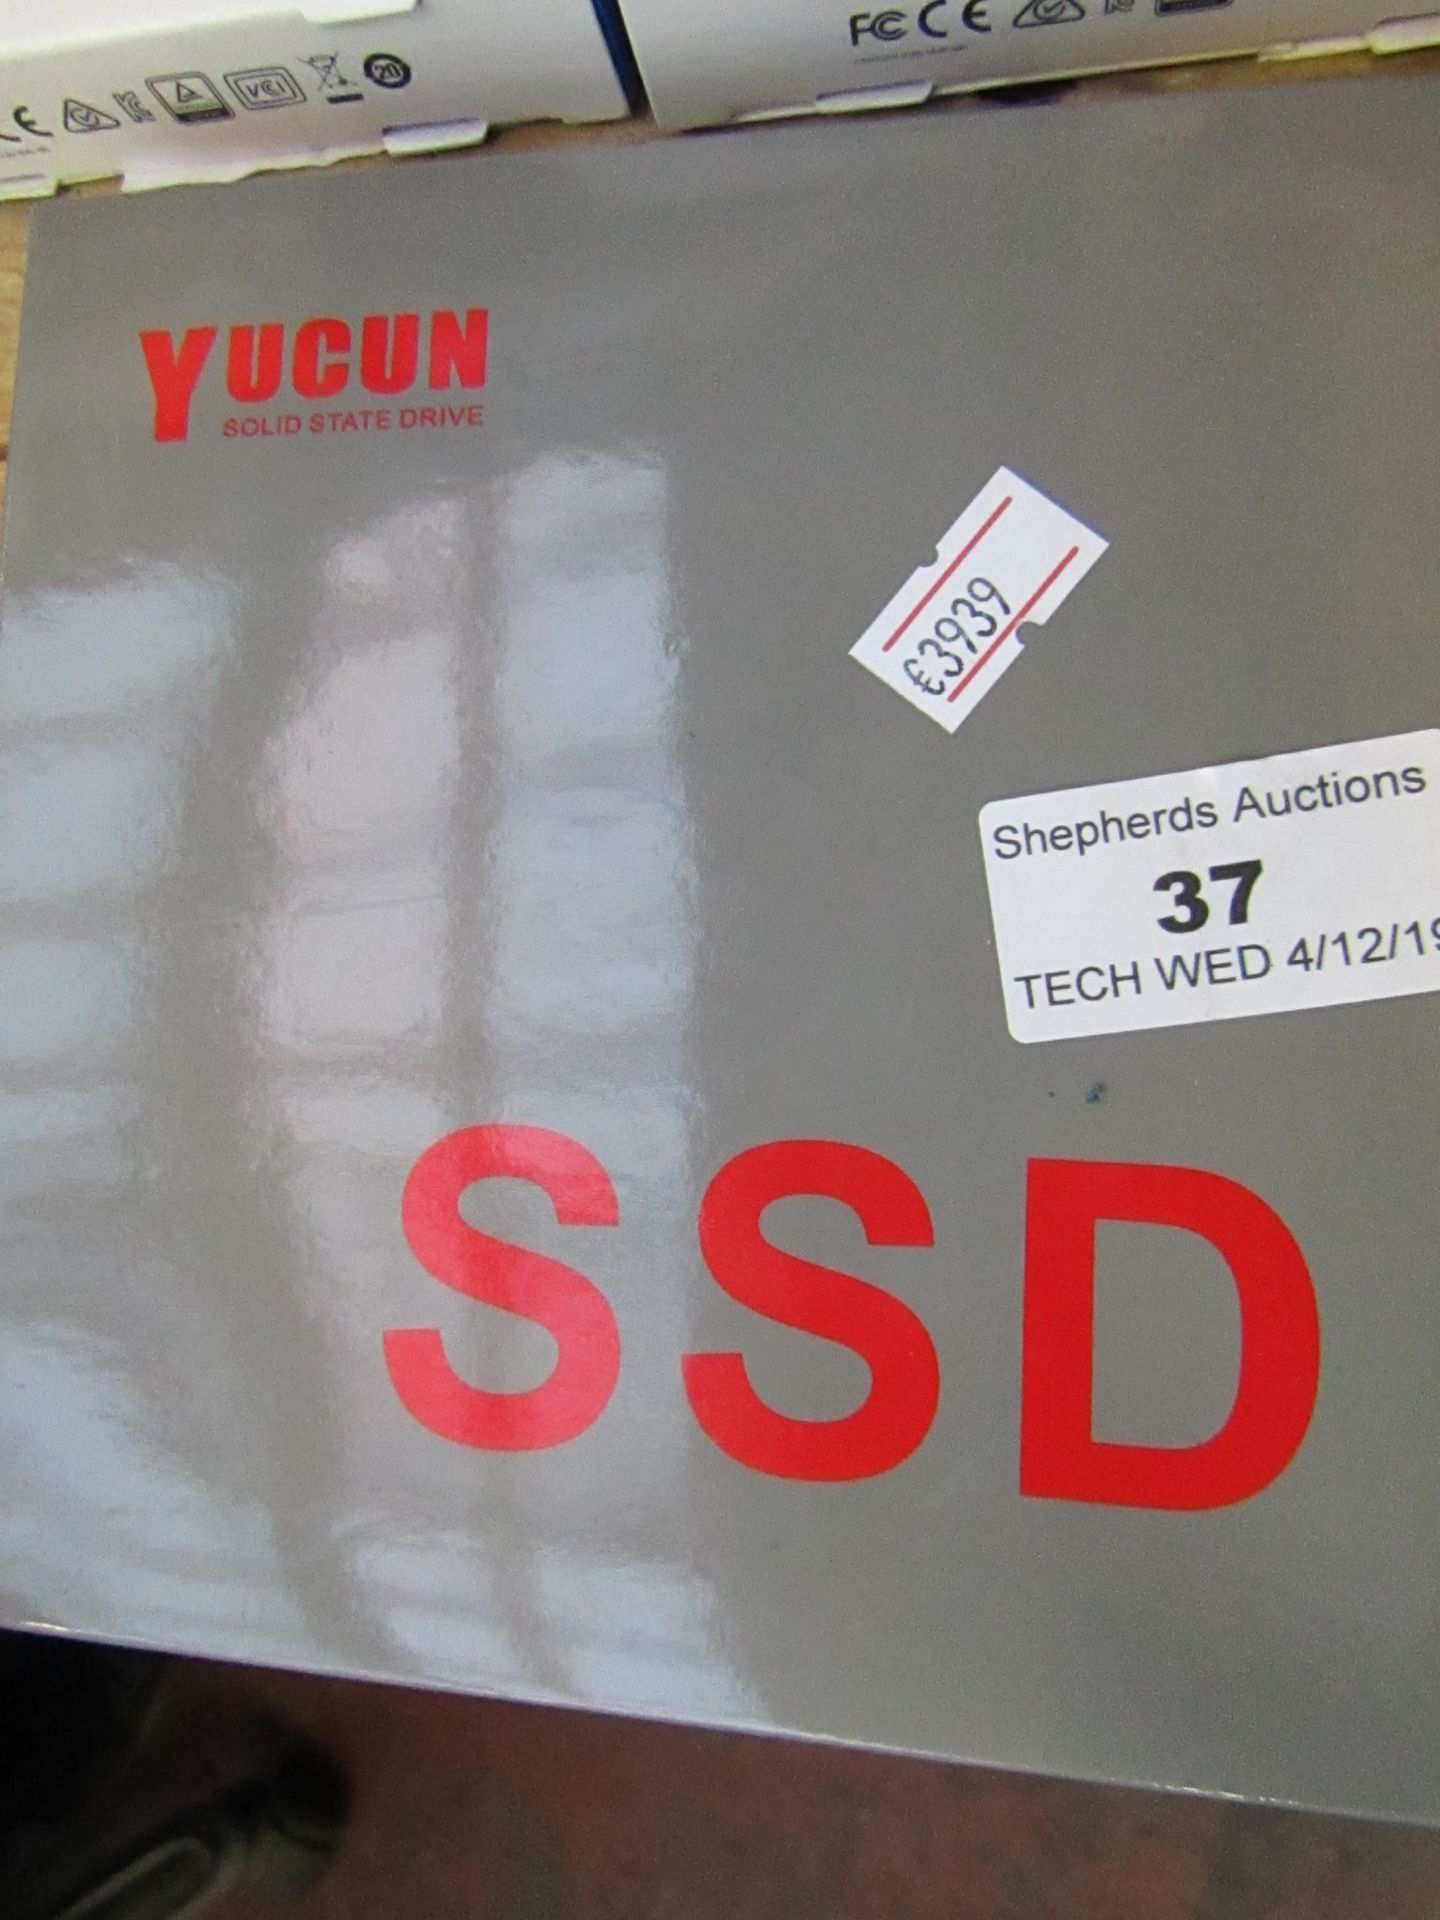 Yucun 120gb SSD, Boxed nad unchecked